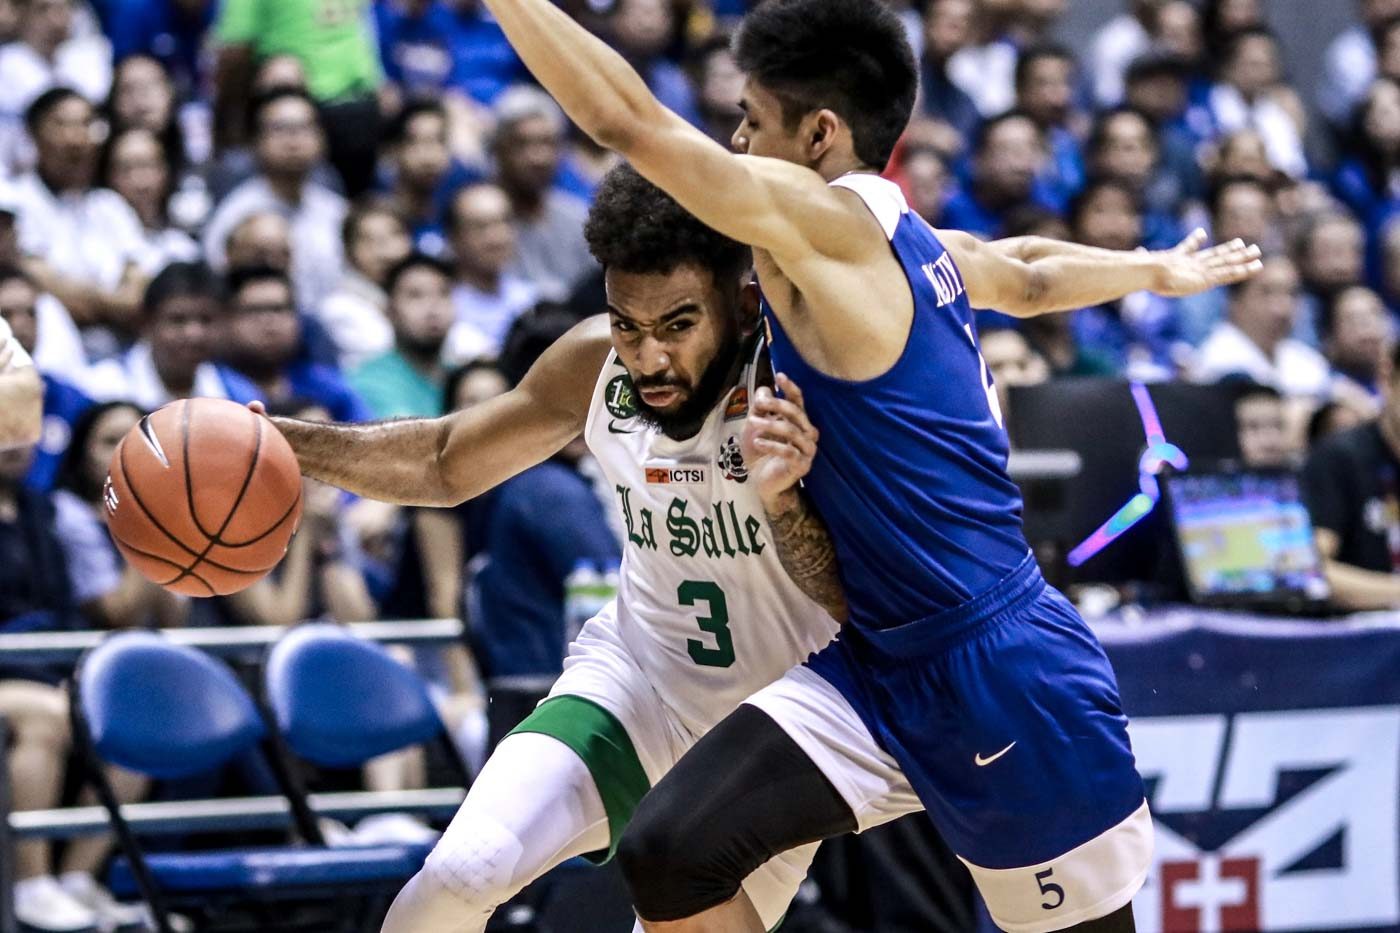 La Salle on the right path, but Ateneo still the UAAP standard